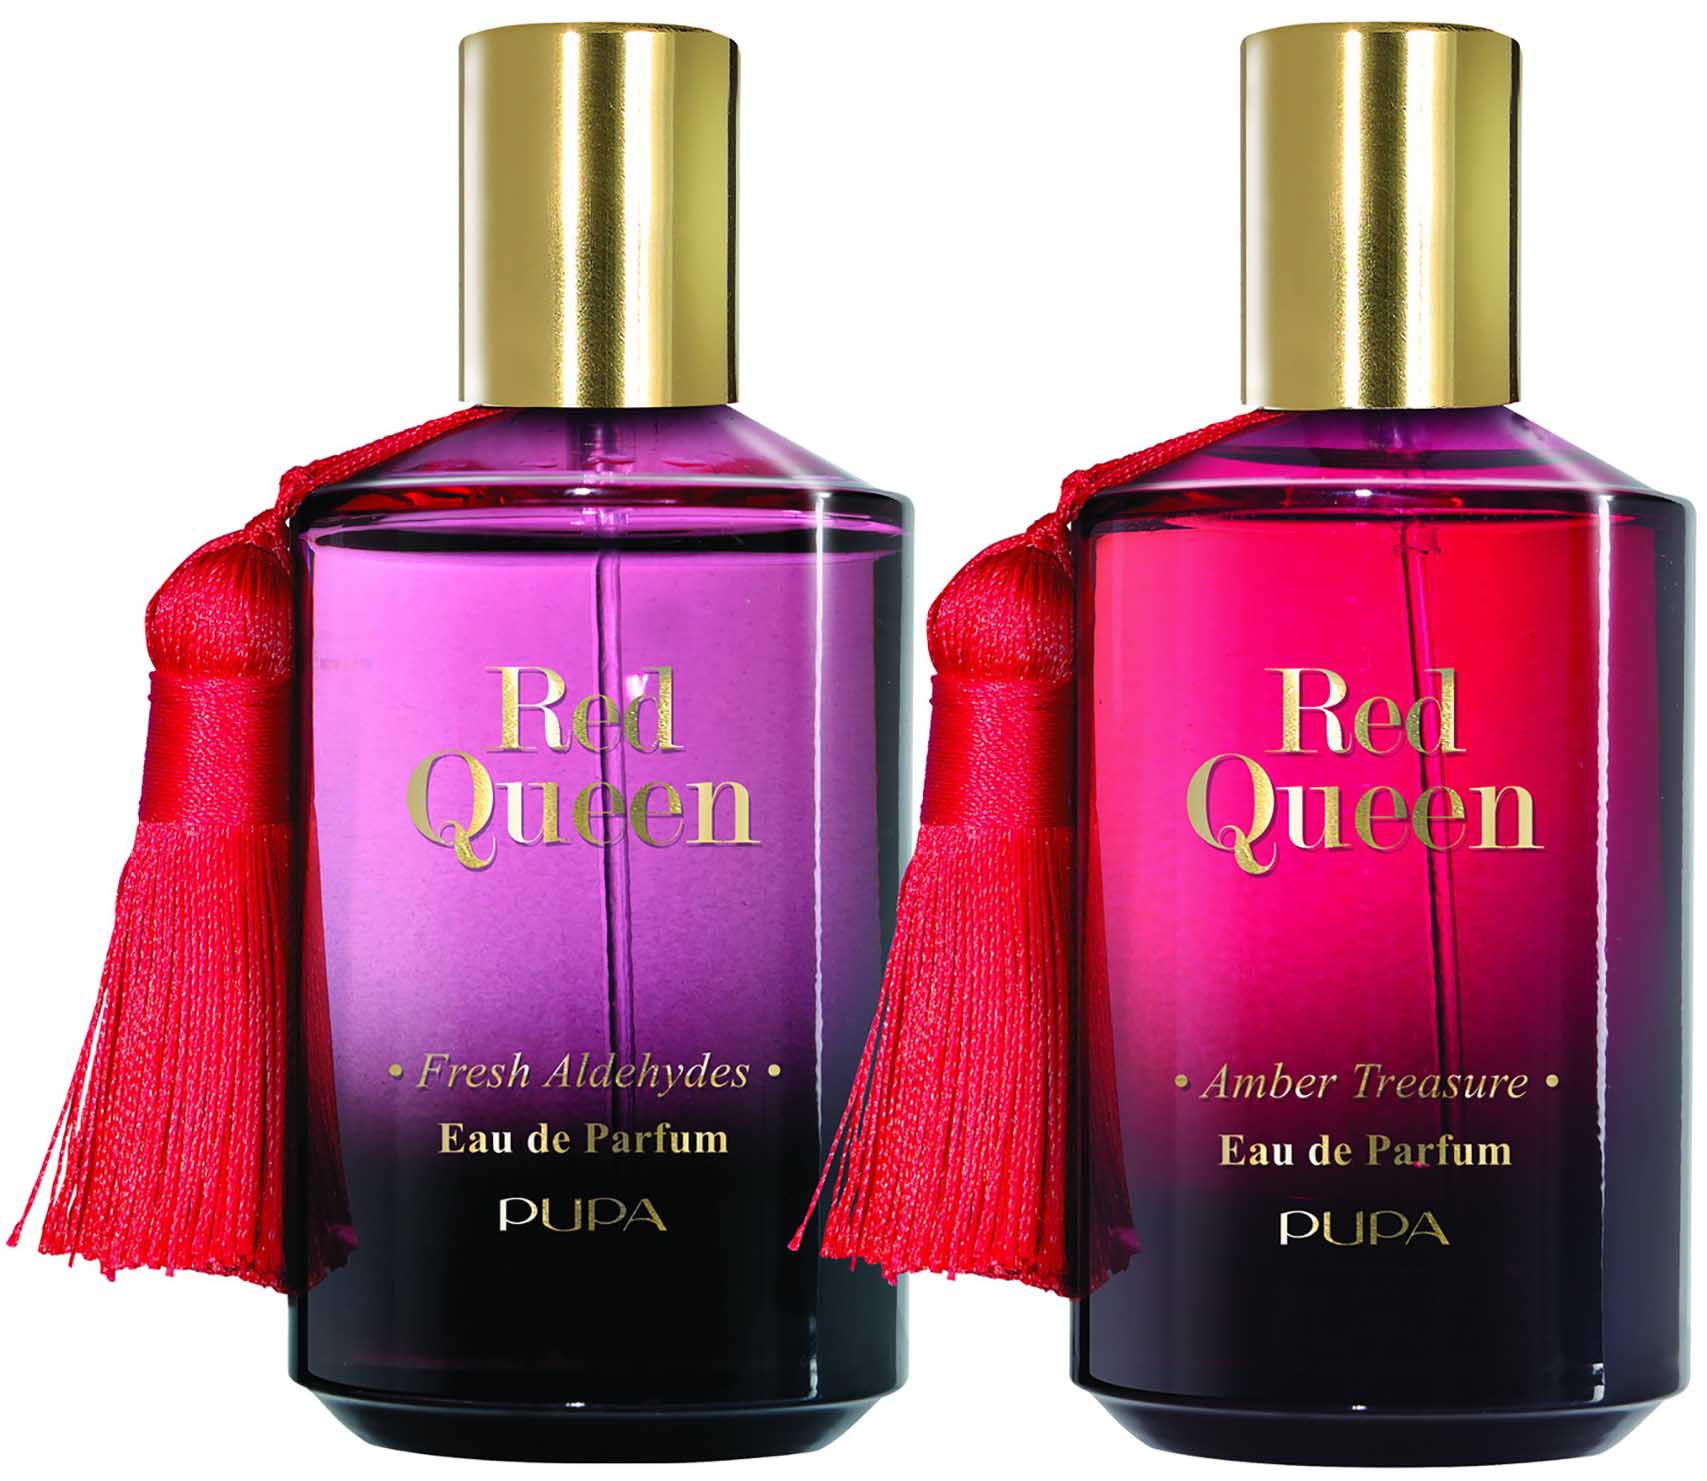 Valentine's Day 2020, pupa red queen perfume 99 שח צילום מילן קרצמן